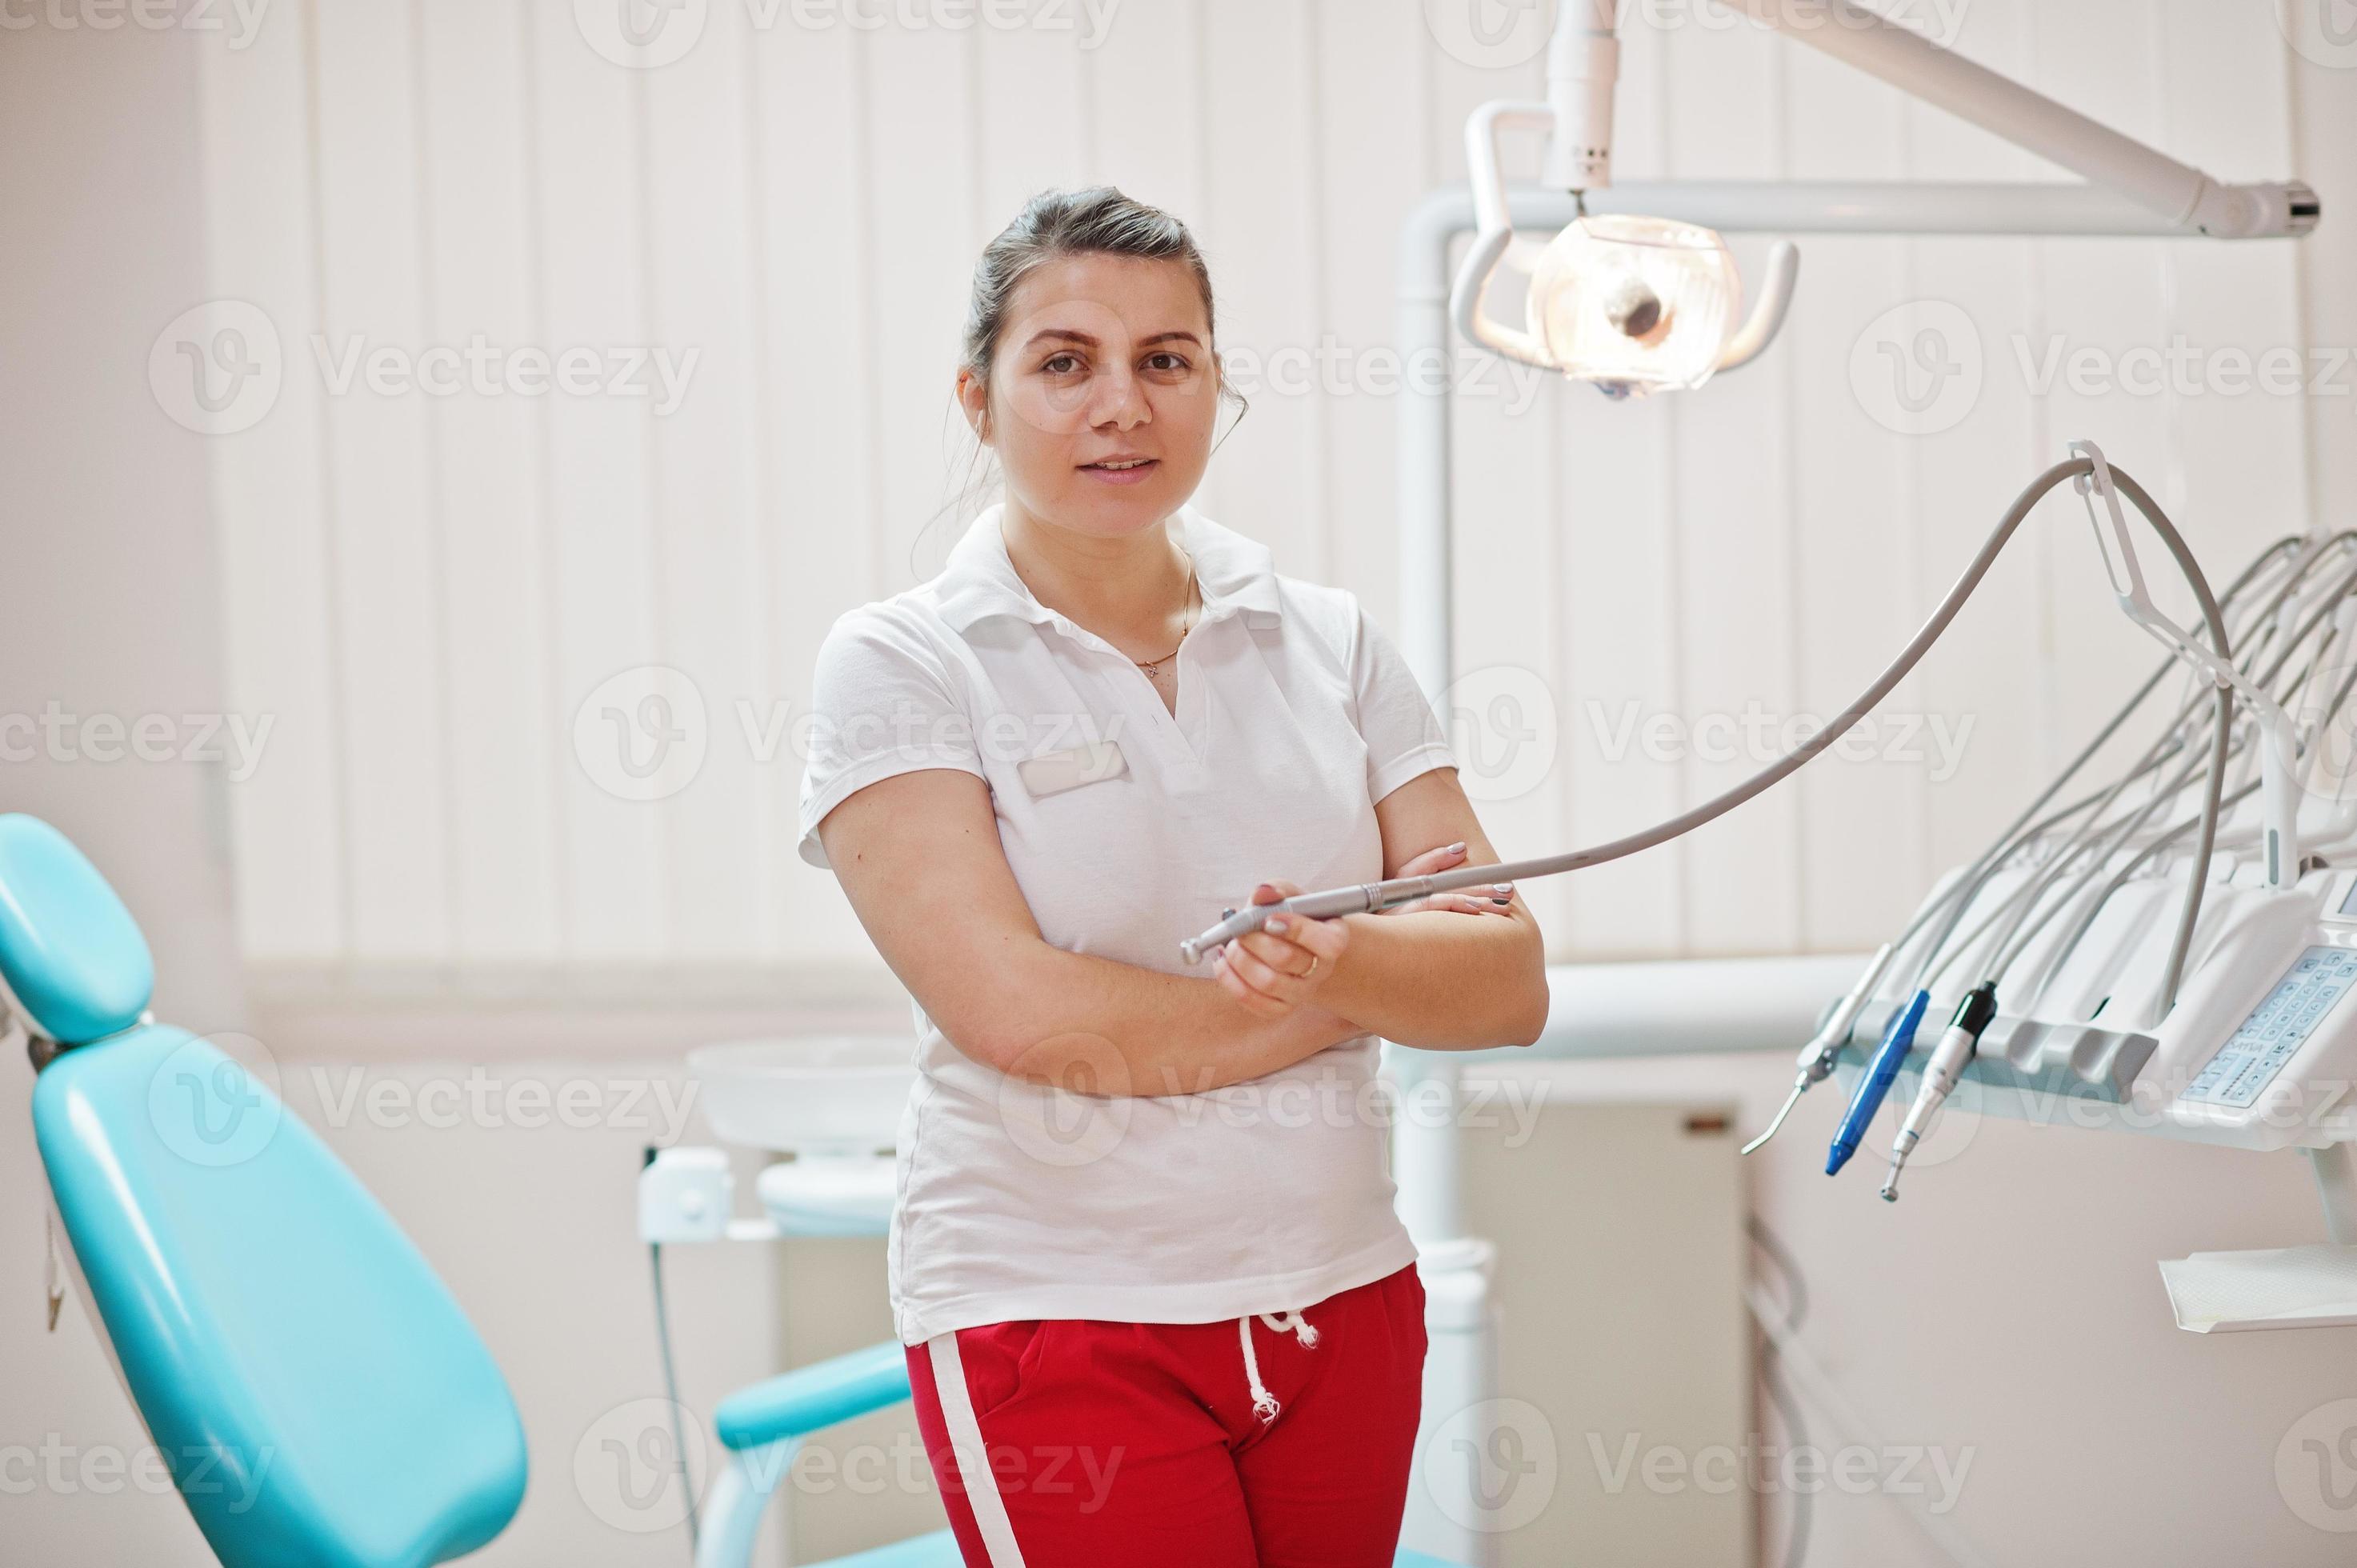 Portrait Of Female Dentist Woman Crossed Arms Standing In Her Dentistry Office Near Chair